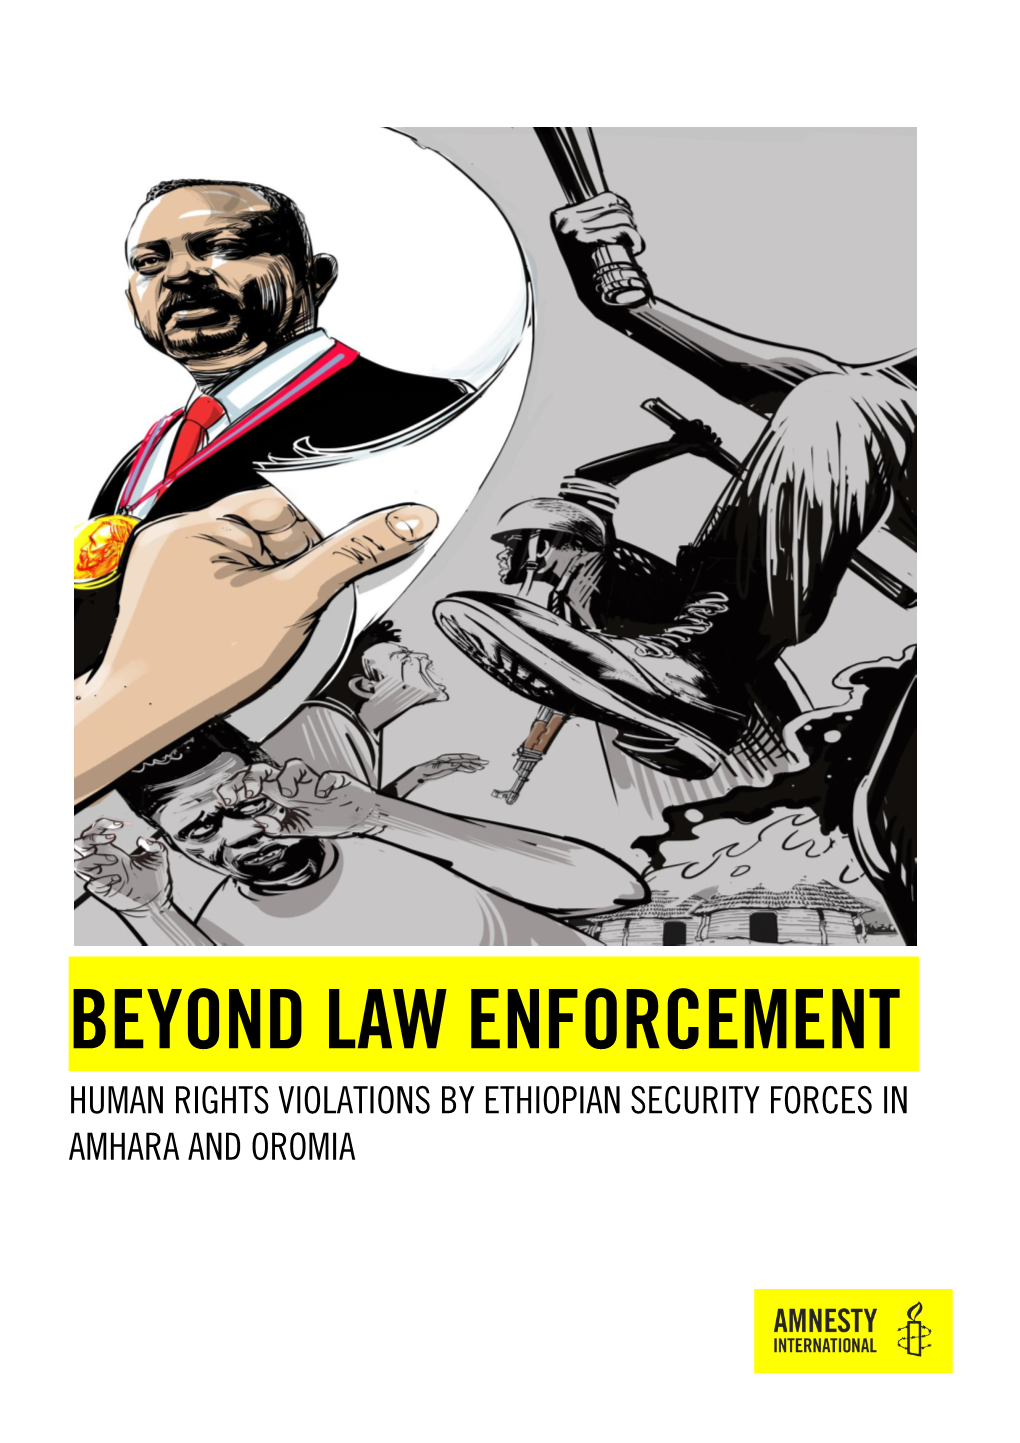 Beyond Law Enforcement Human Rights Violations by Ethiopian Security Forces in Amhara and Oromia